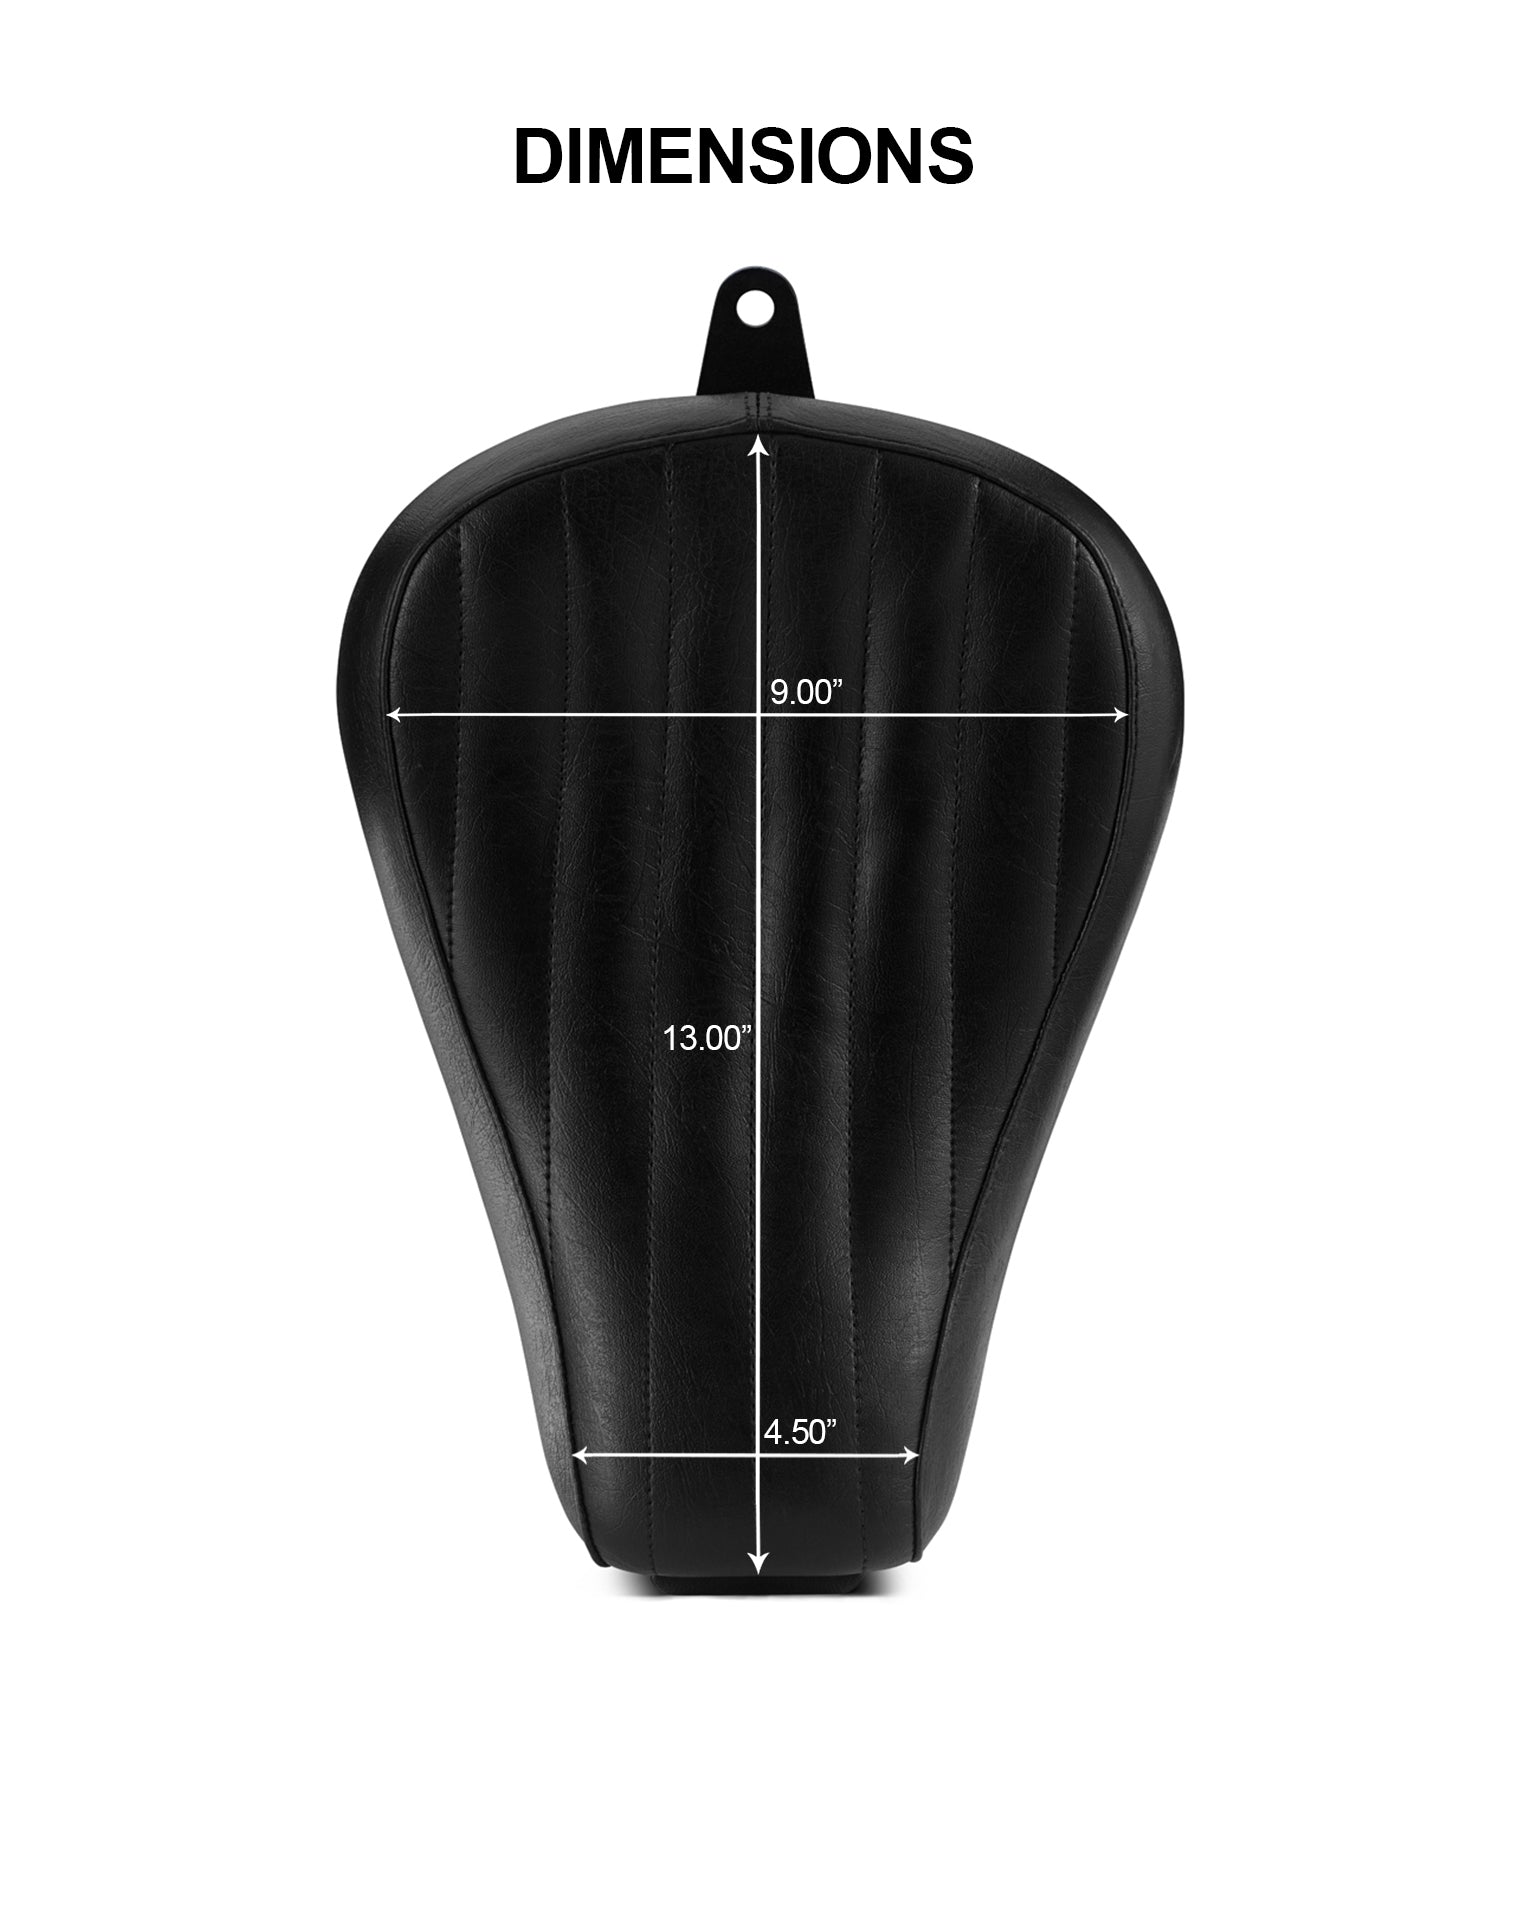 Iron Born Vertical Stitch Motorcycle Solo Seat for Harley Sportster 883 Iron XL883N Seat Dimensions